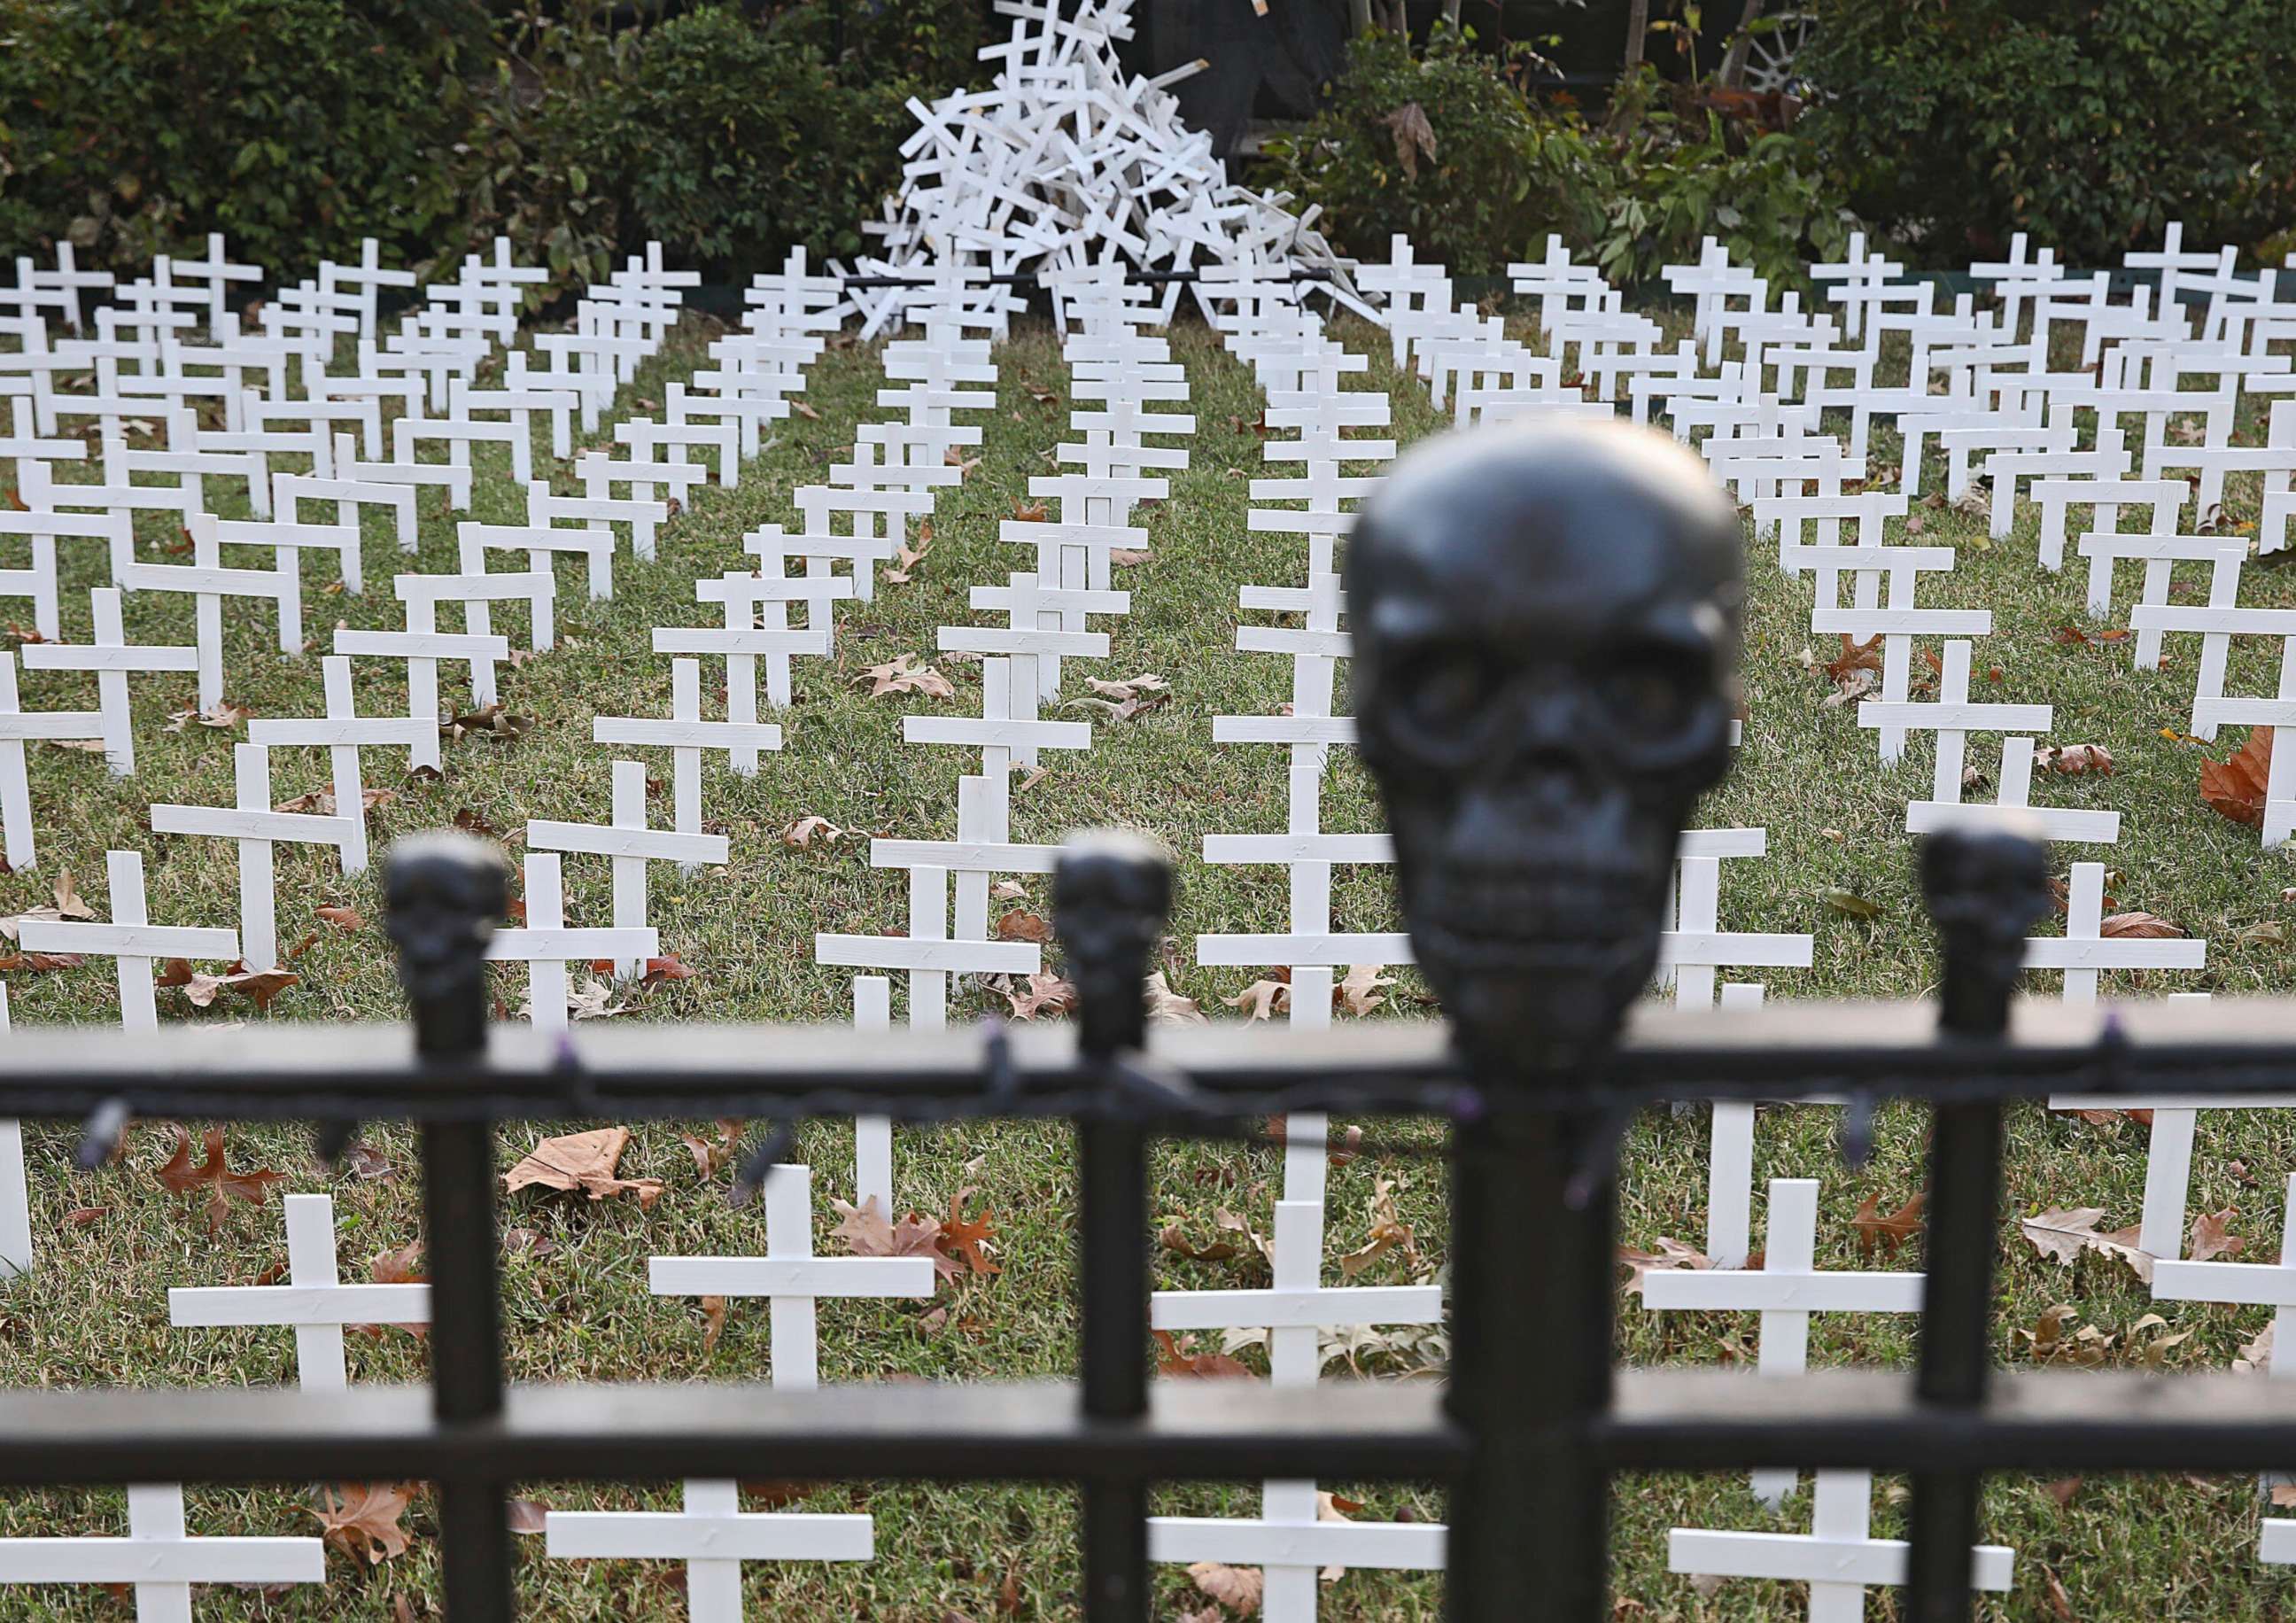 PHOTO: Toby Gregory's yard that is adorned with over 1,000 white crosses to represent Oklahoma deaths due to COVID-19, Oct. 14, 2020, in Tulsa, Okla.